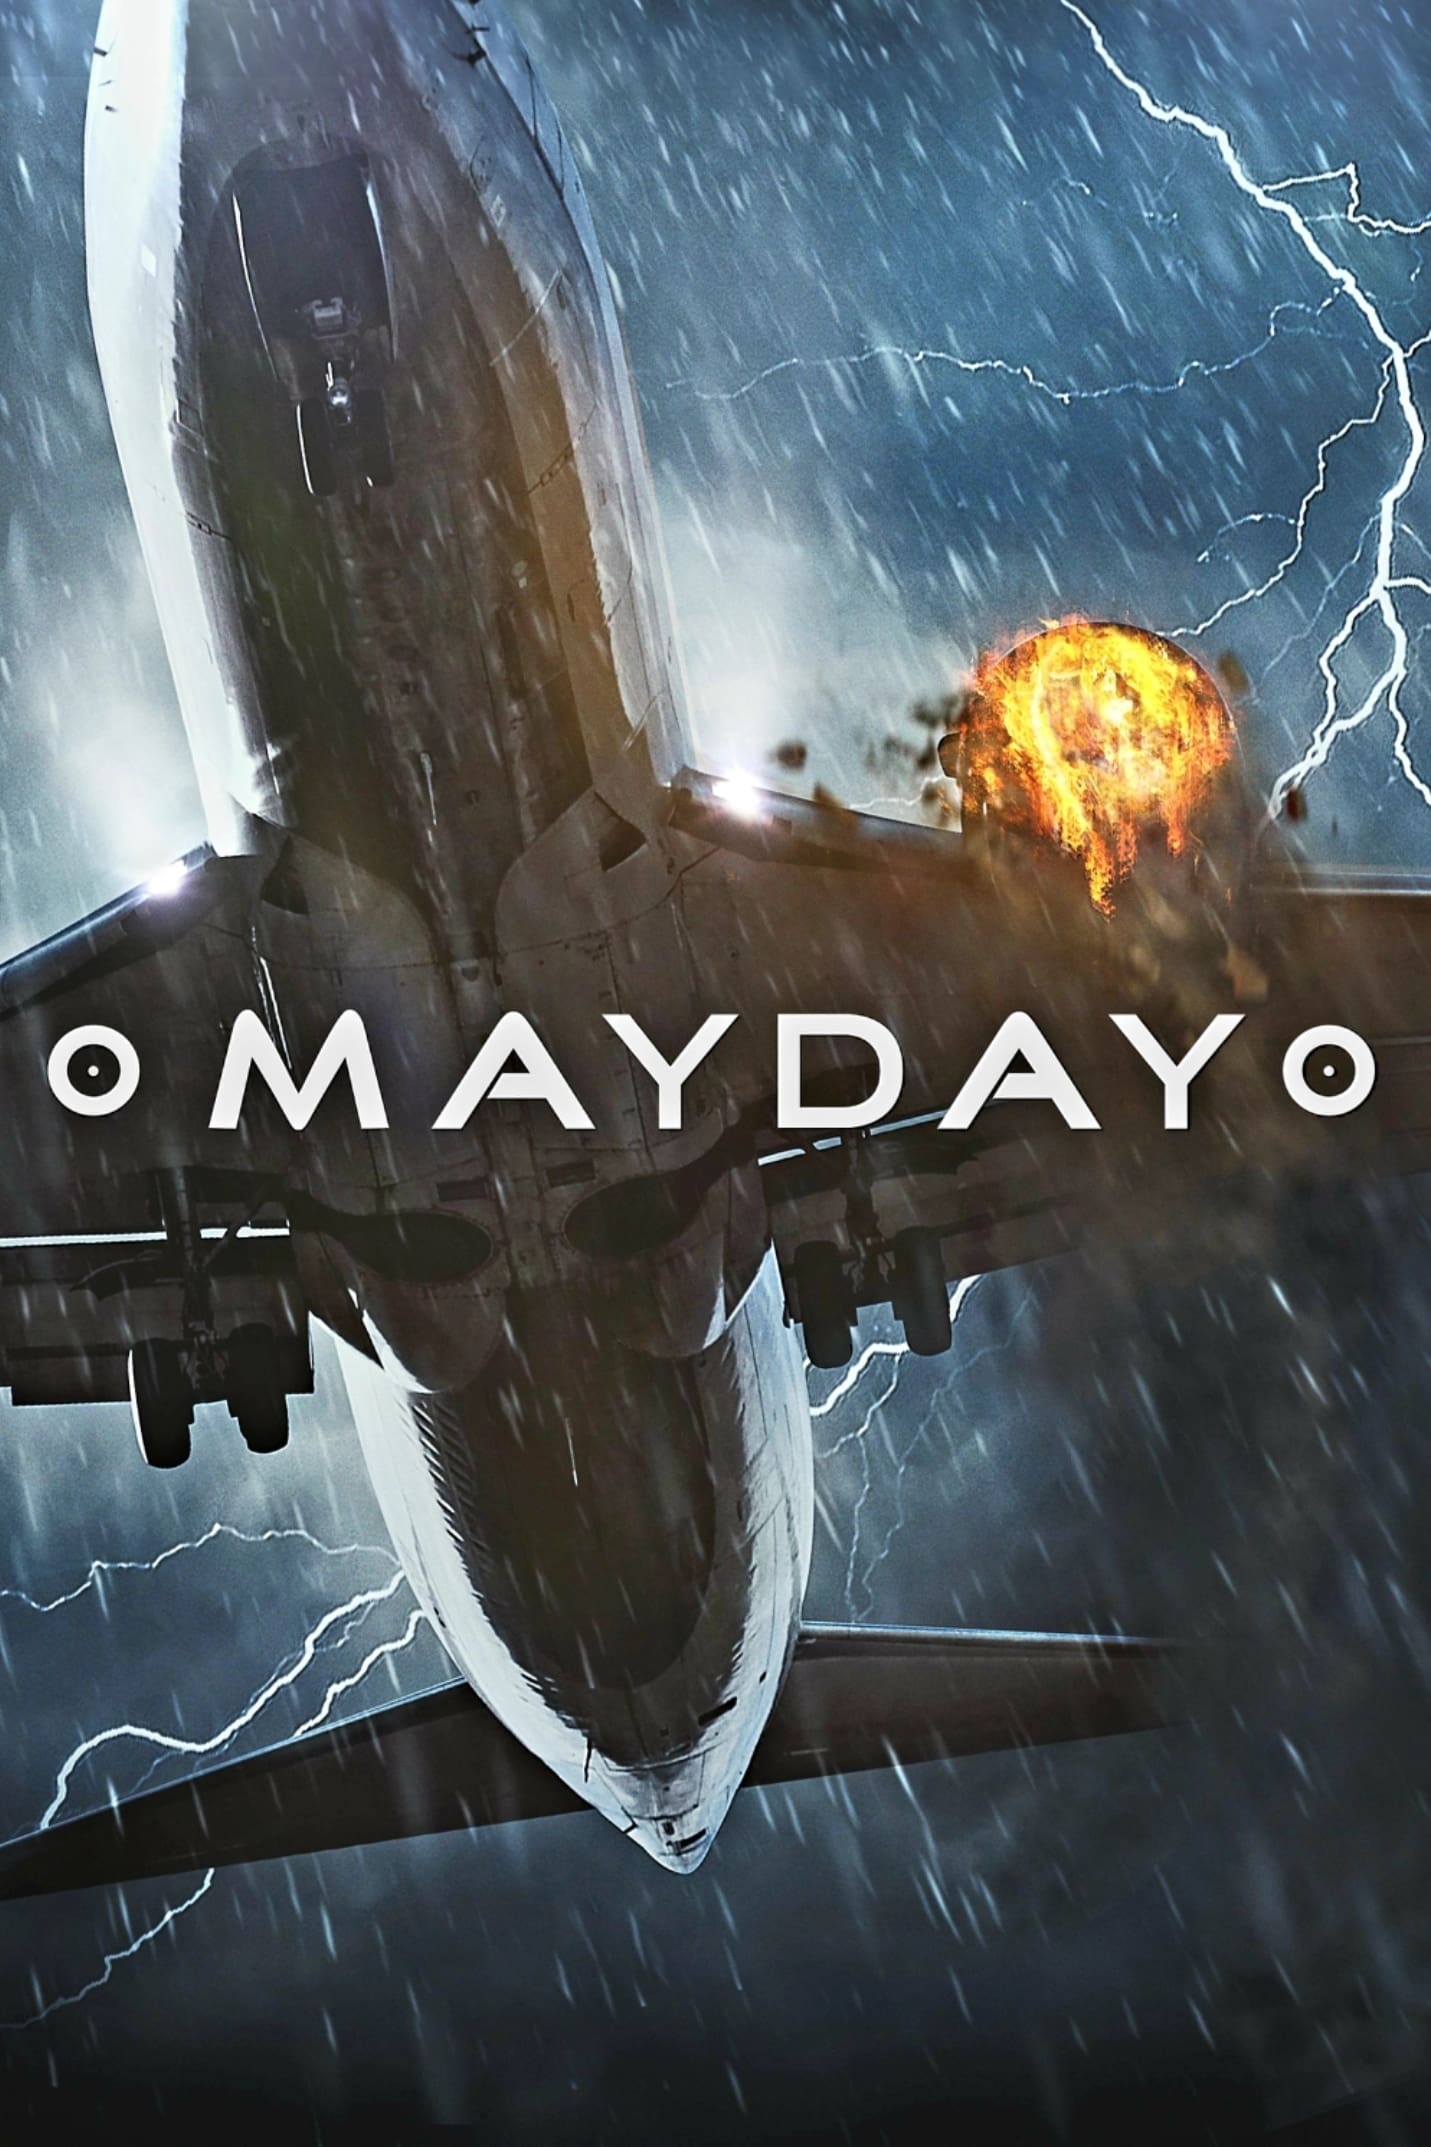 Mayday TV Shows About Exploding Airplane